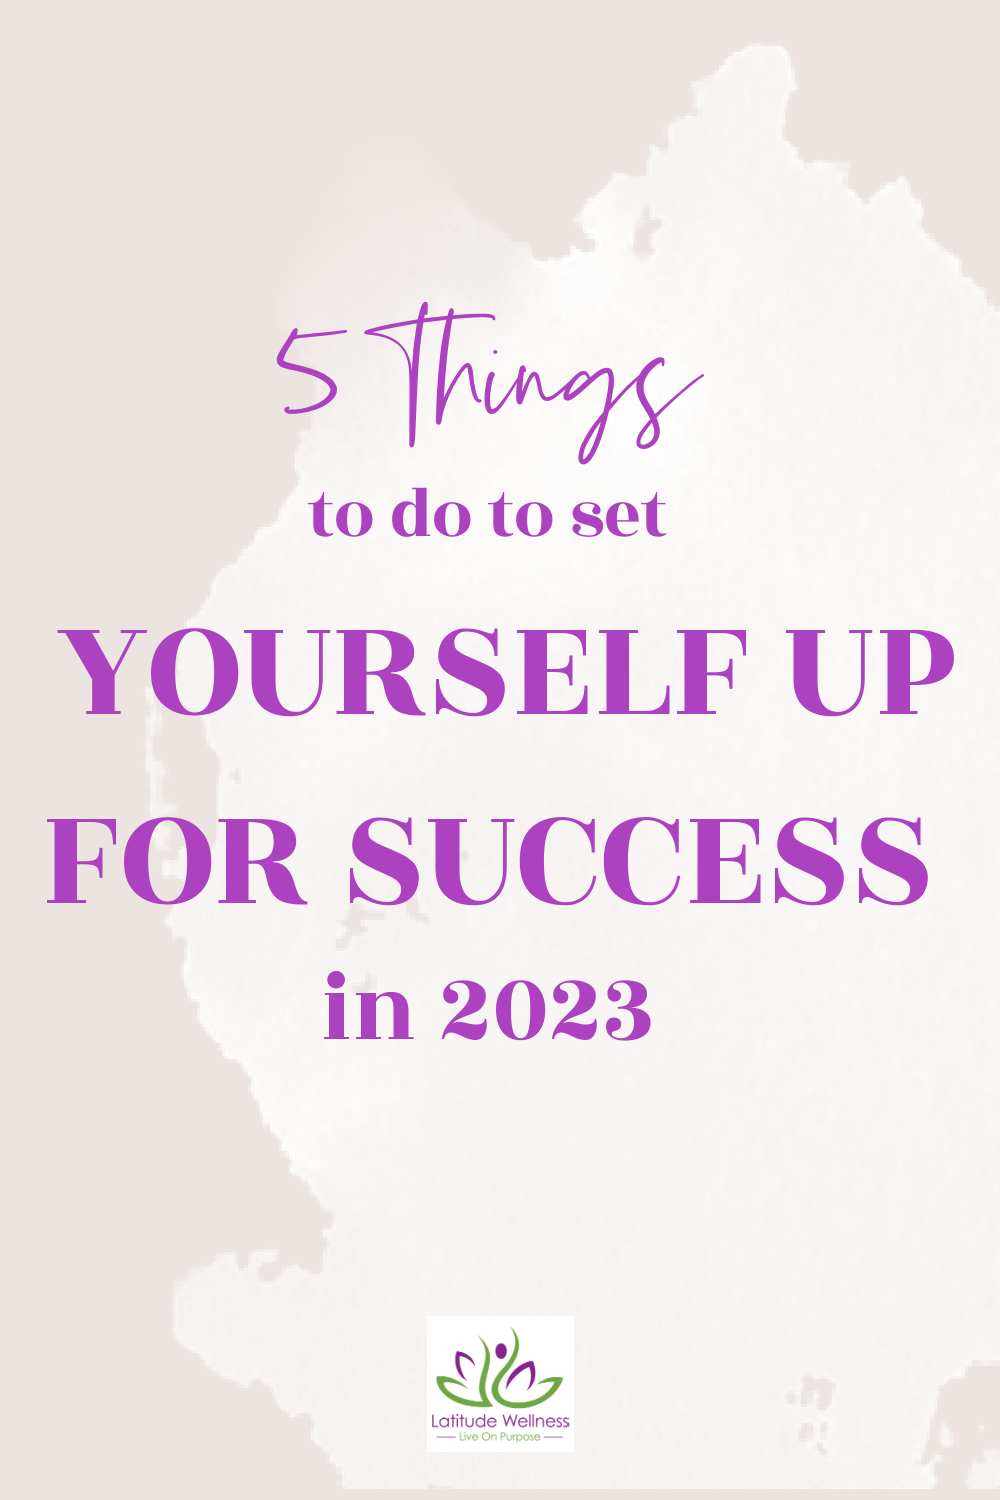 You are currently viewing 5 simple steps to set yourself up for success in 2023